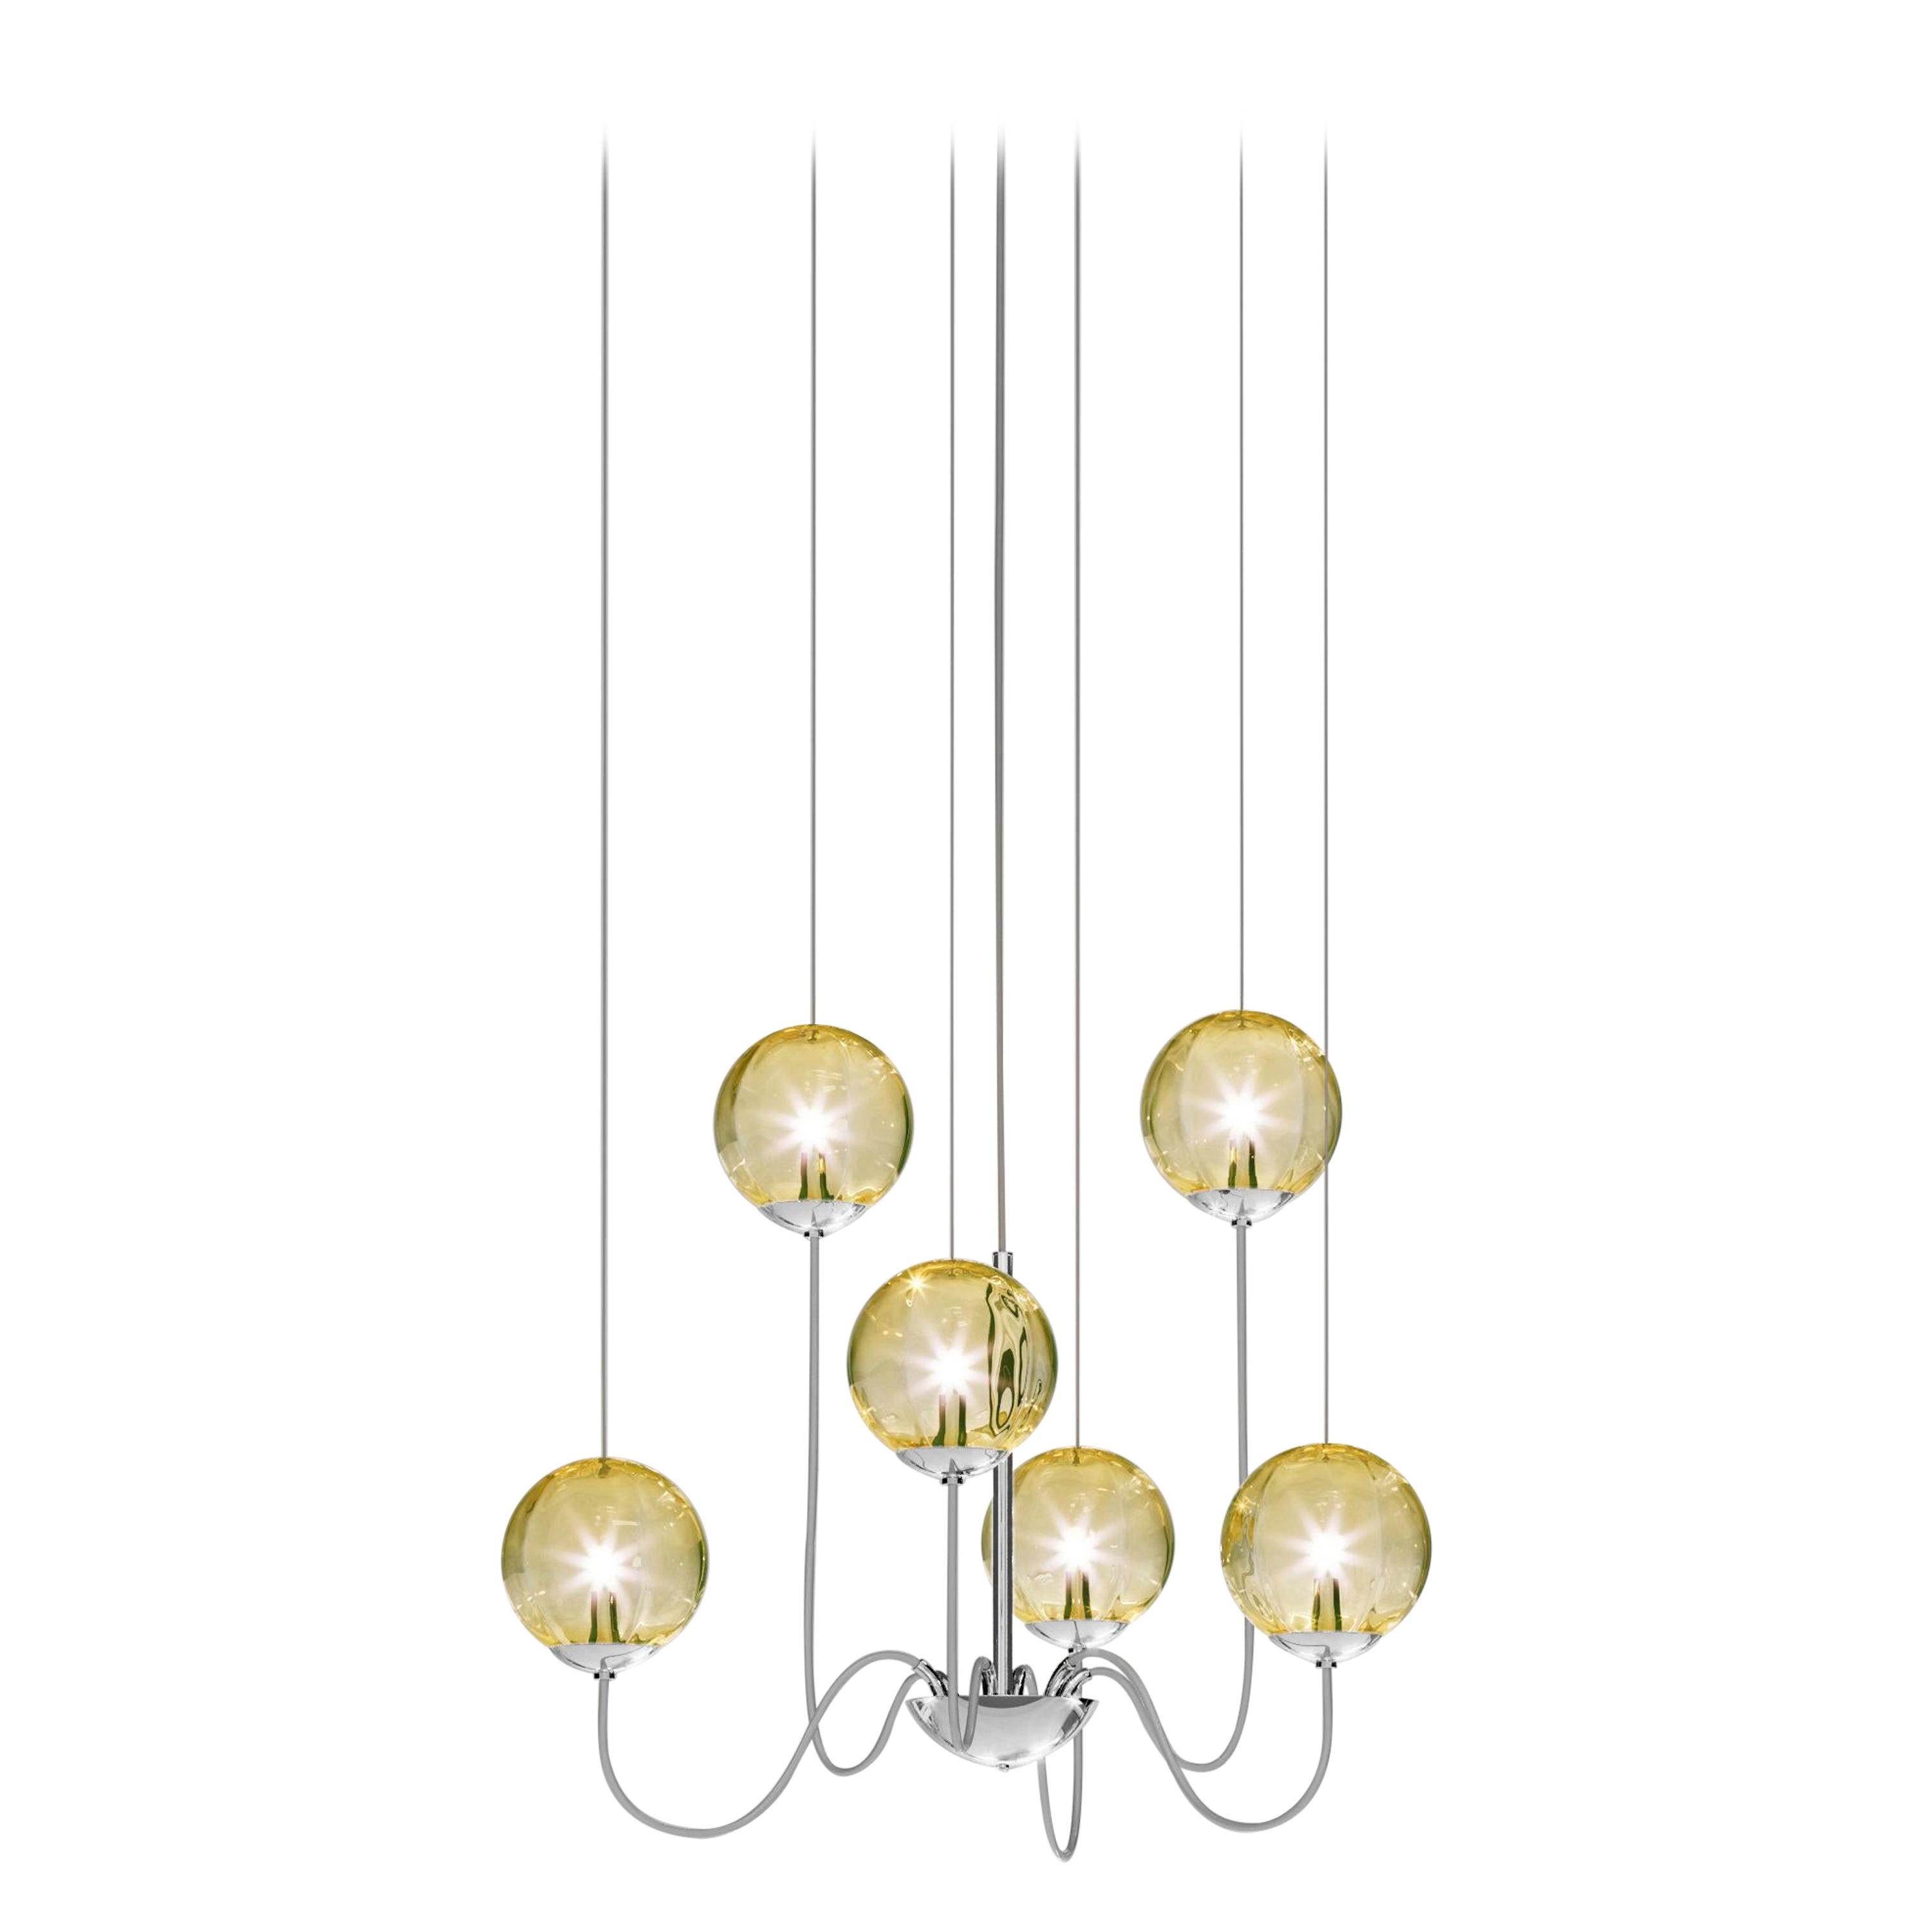 Vistosi Puppet Pendant Light in Amber Transparent Glass And Glossy Chrome Frame